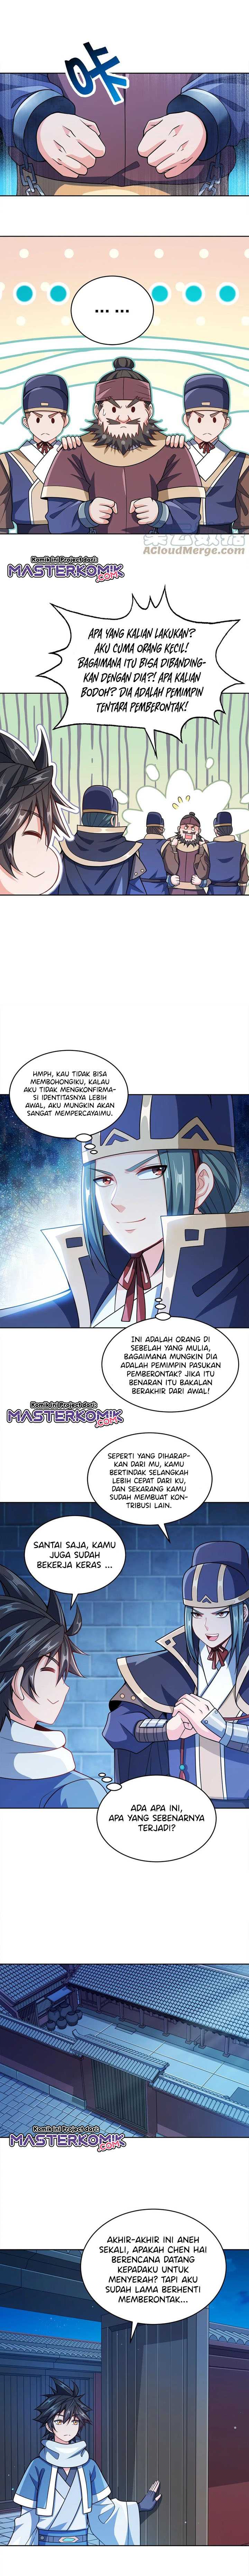 My Lady Is Actually the Empress? Chapter 41